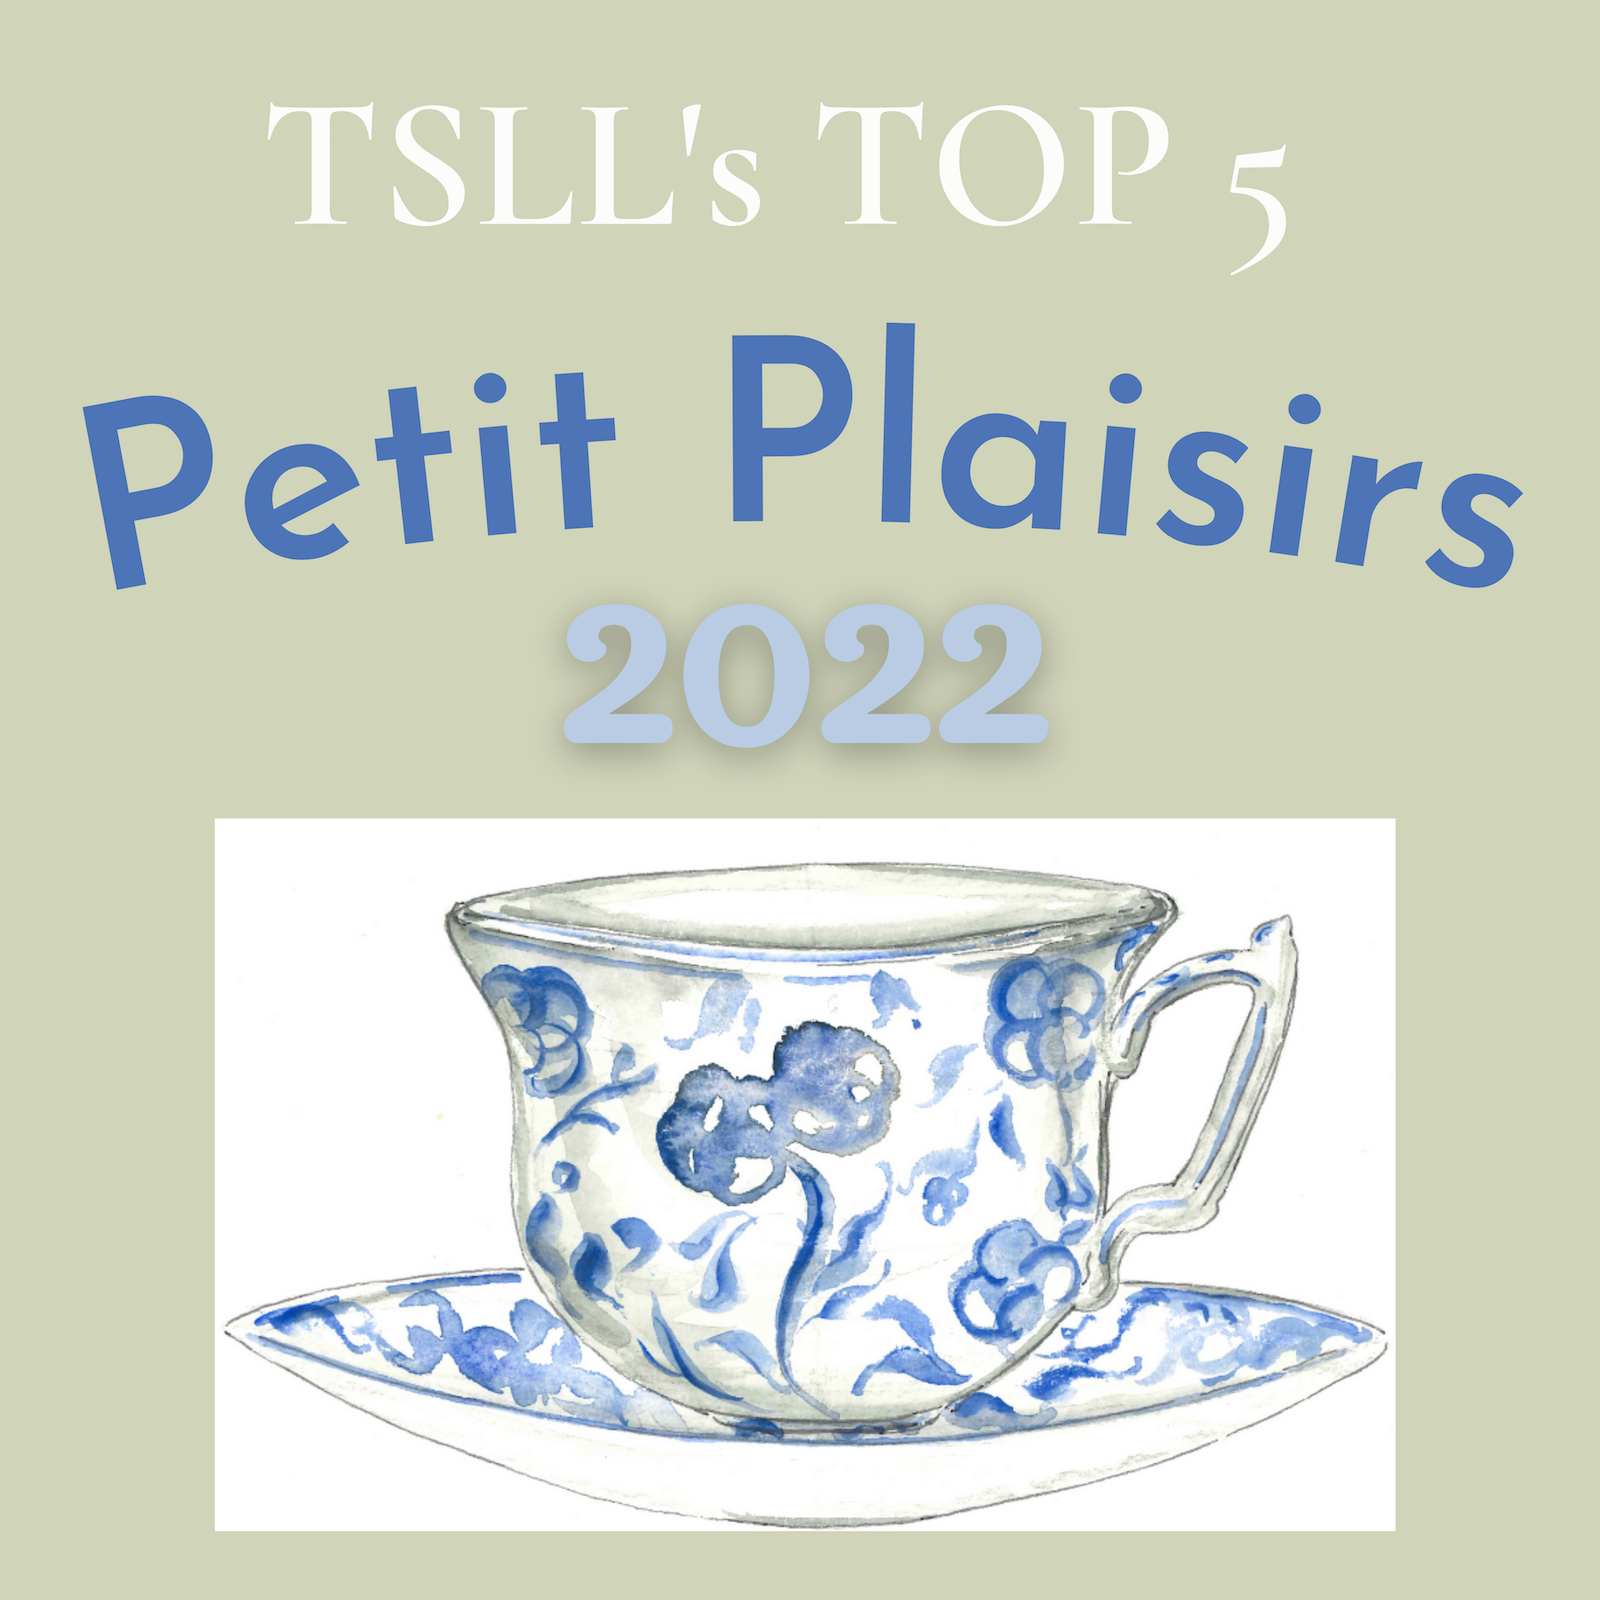 The TOP 5 Petit Plaisirs of 2022